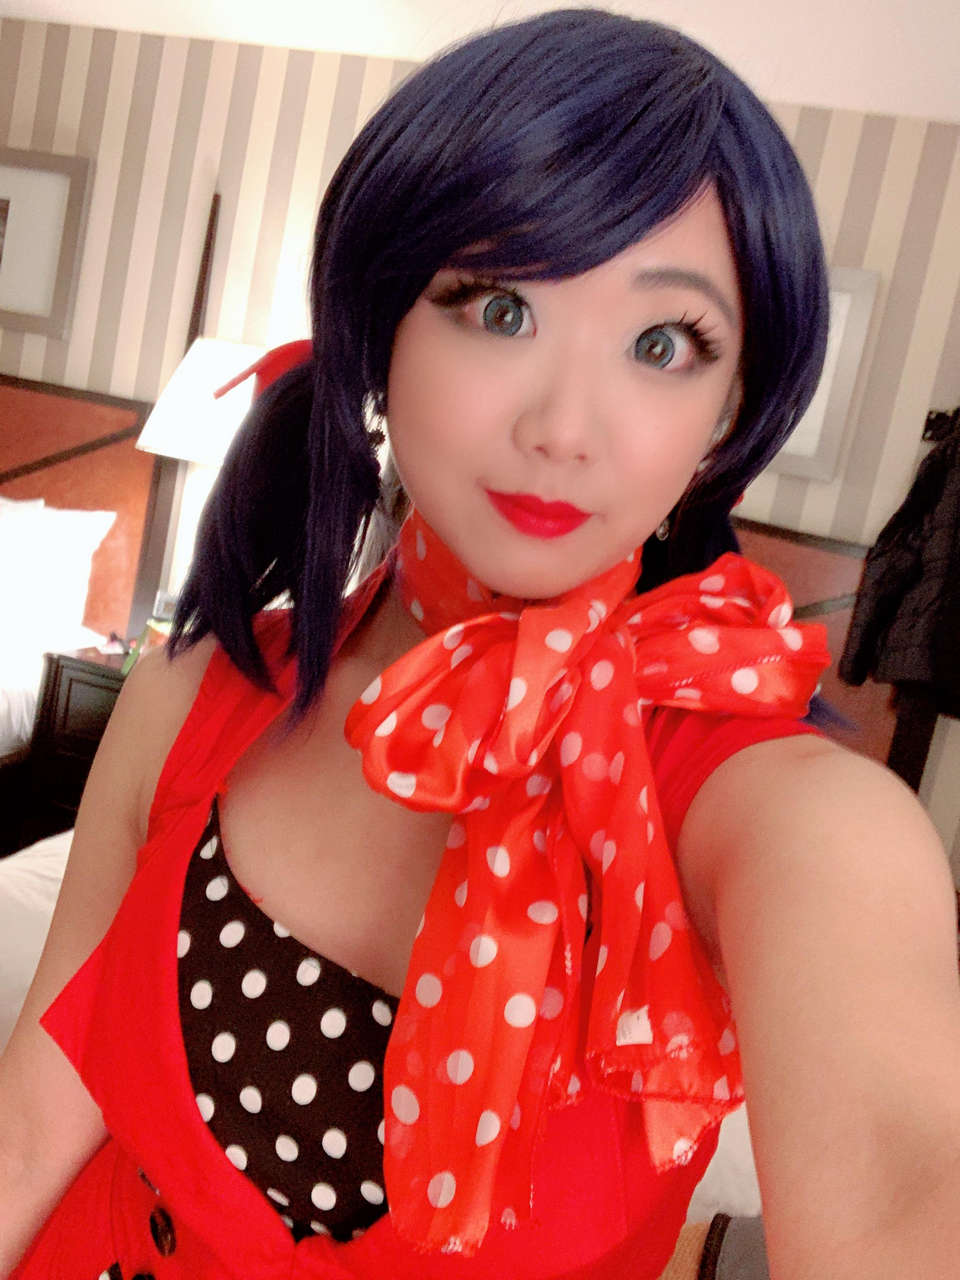 Marinette From Miraculous Ladybug Cosplay By Pearlpeon